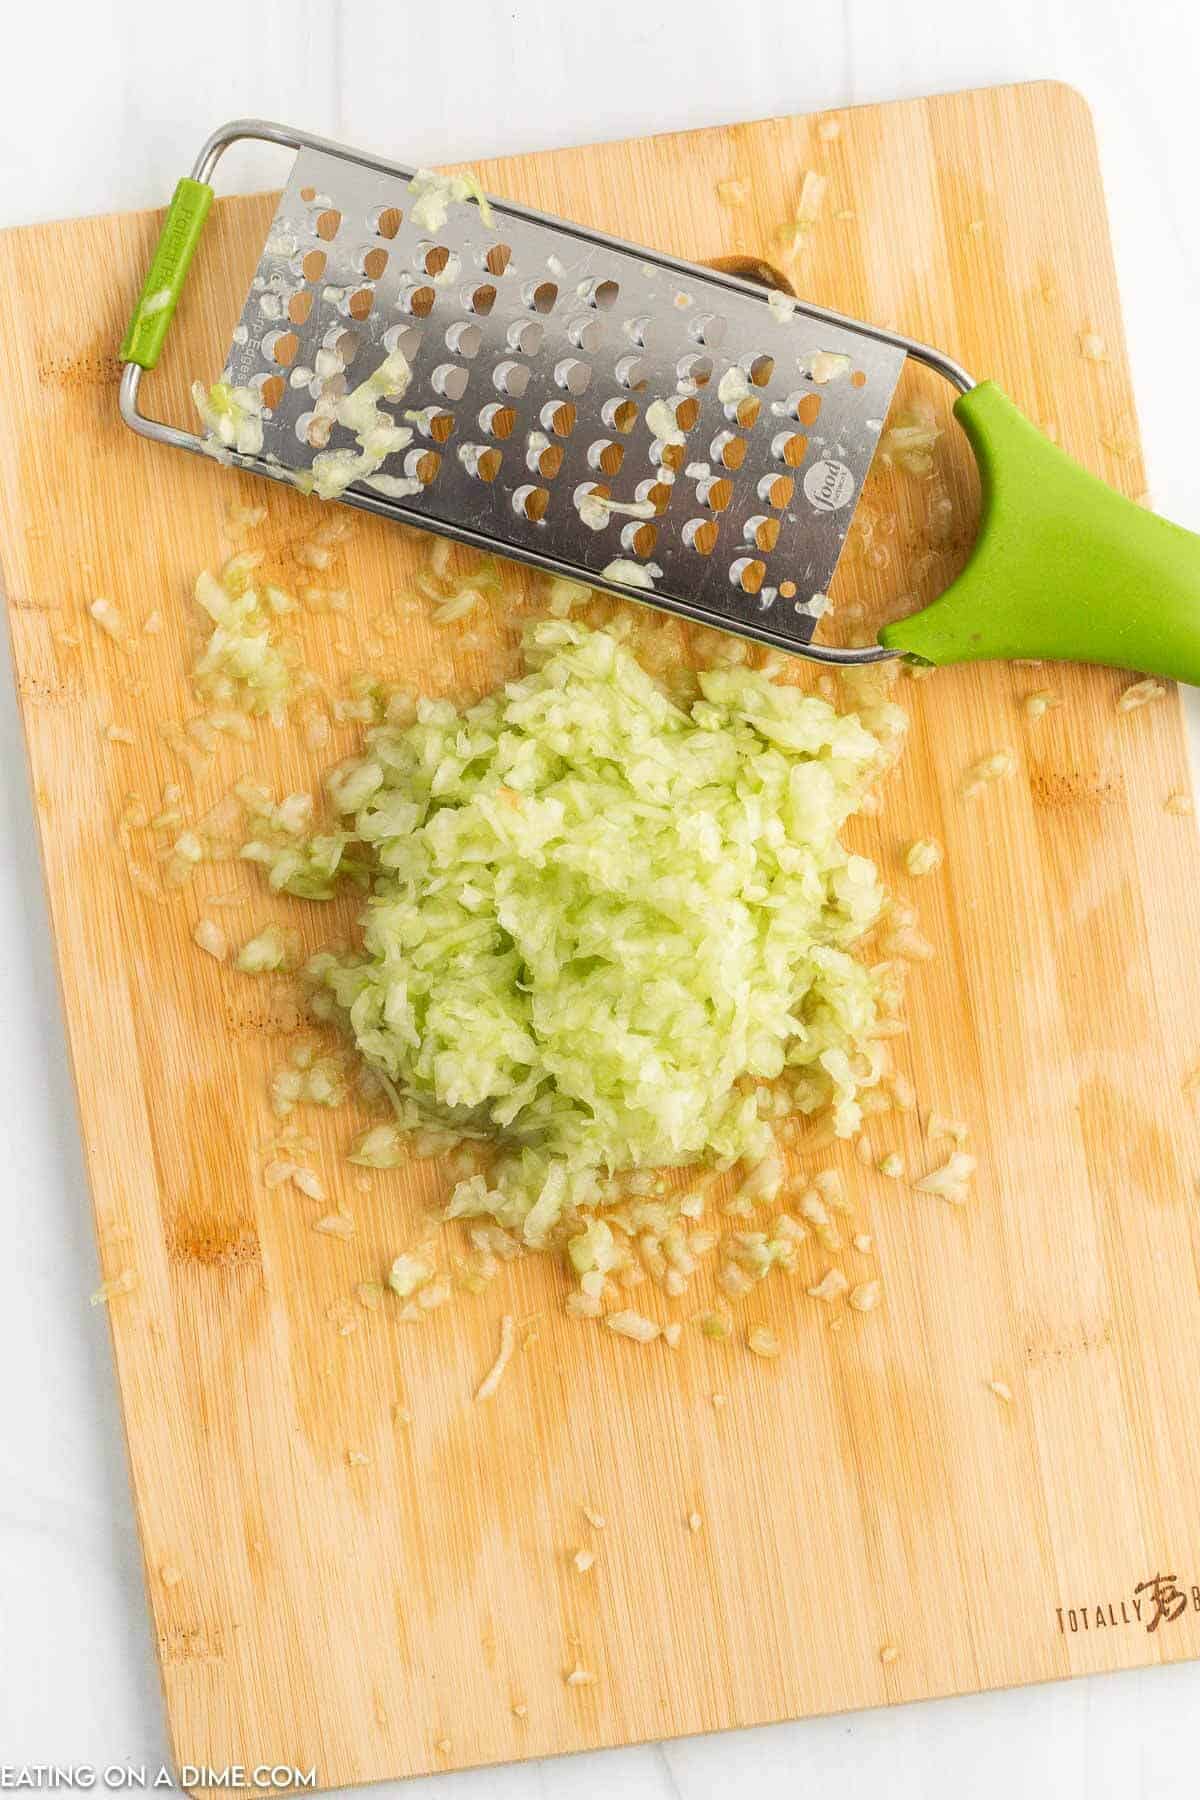 Shred cucumber into small pieces